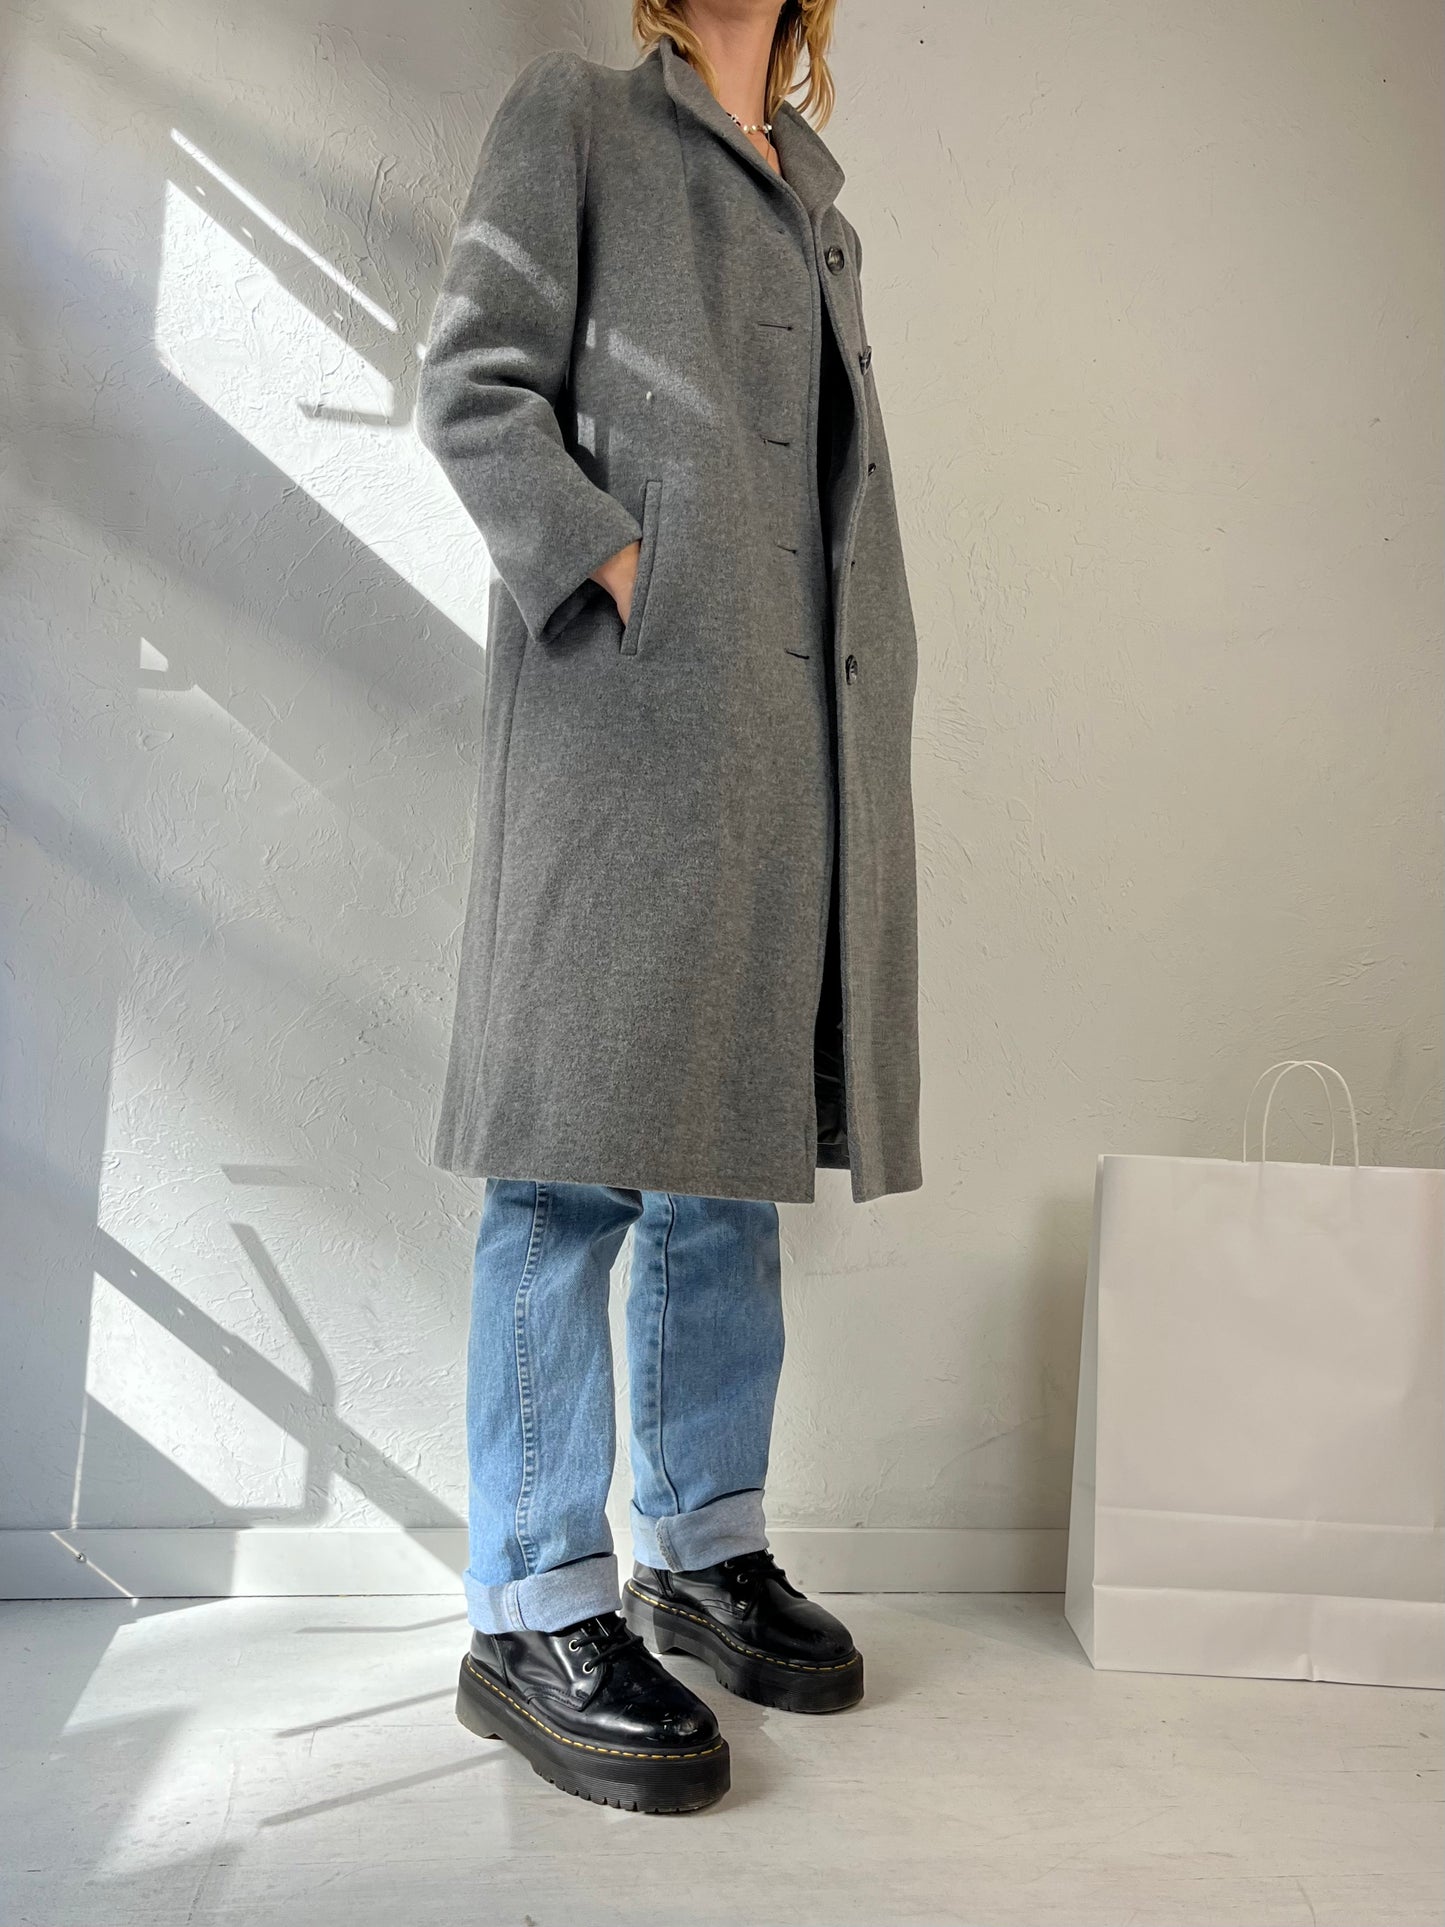 70s 80s 'Nordstrom' Gray Wool Coat / Union Made / Small